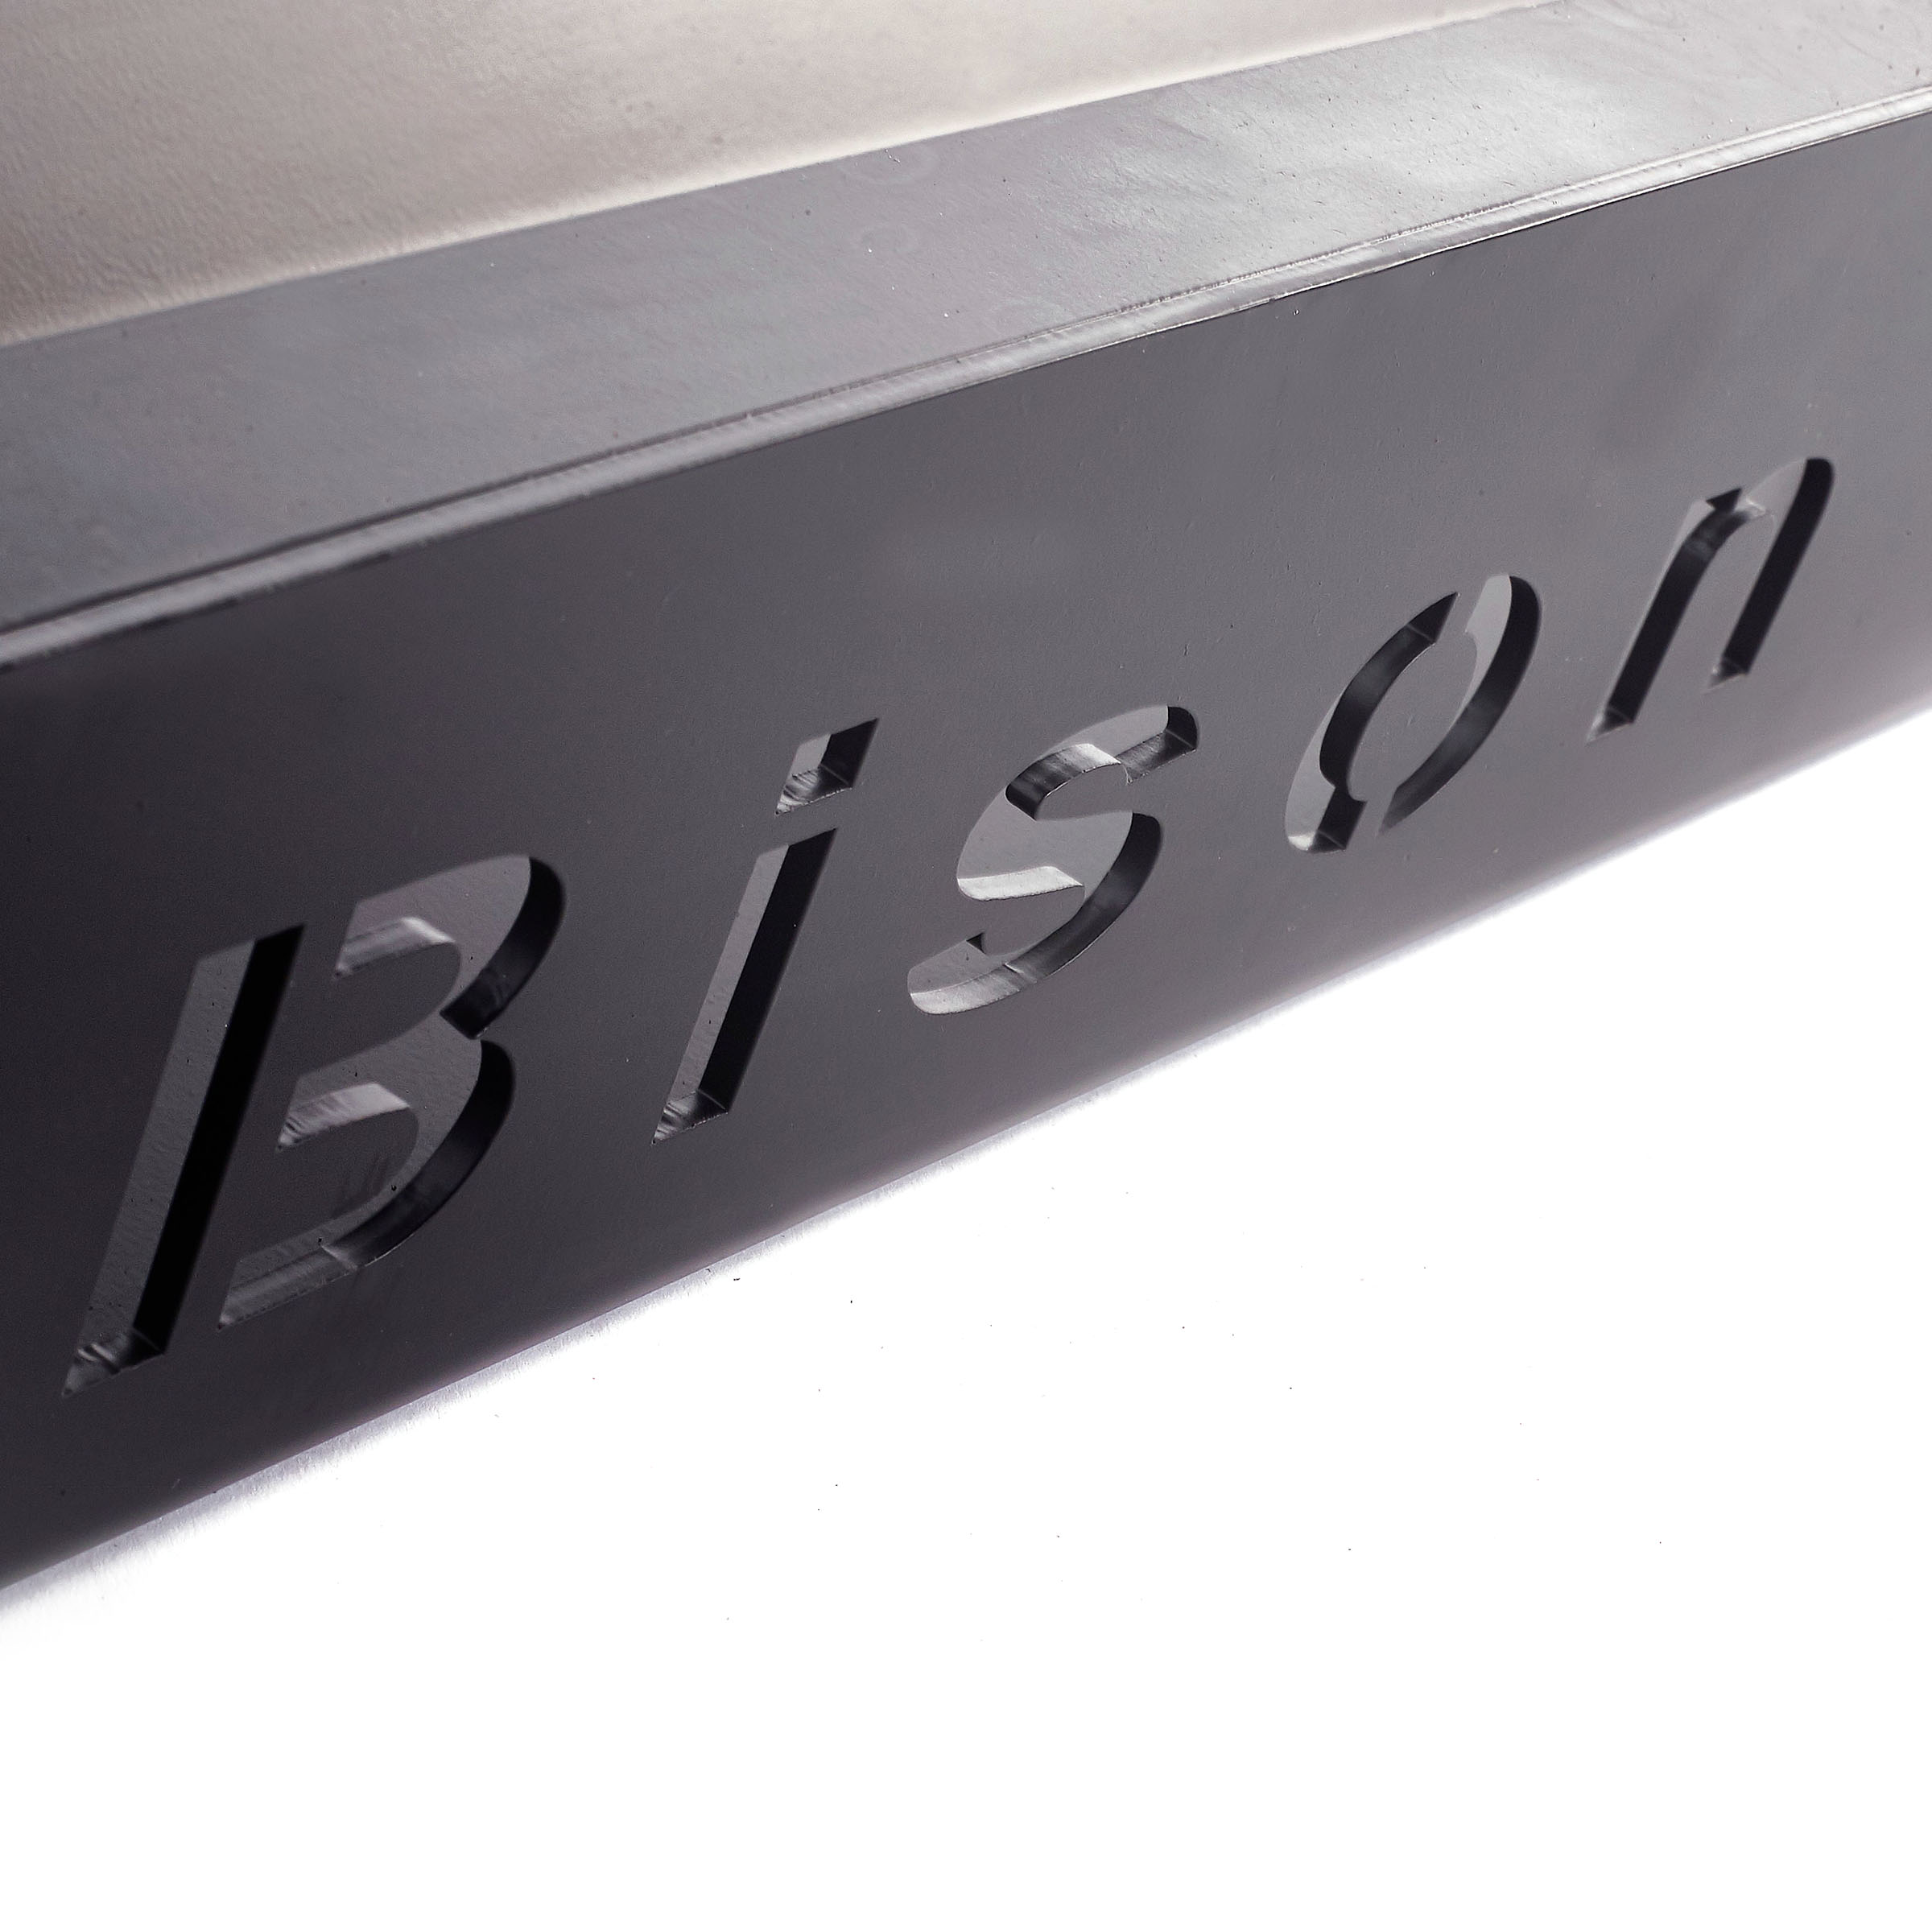 Bison Power Sled - Wolverson Fitness